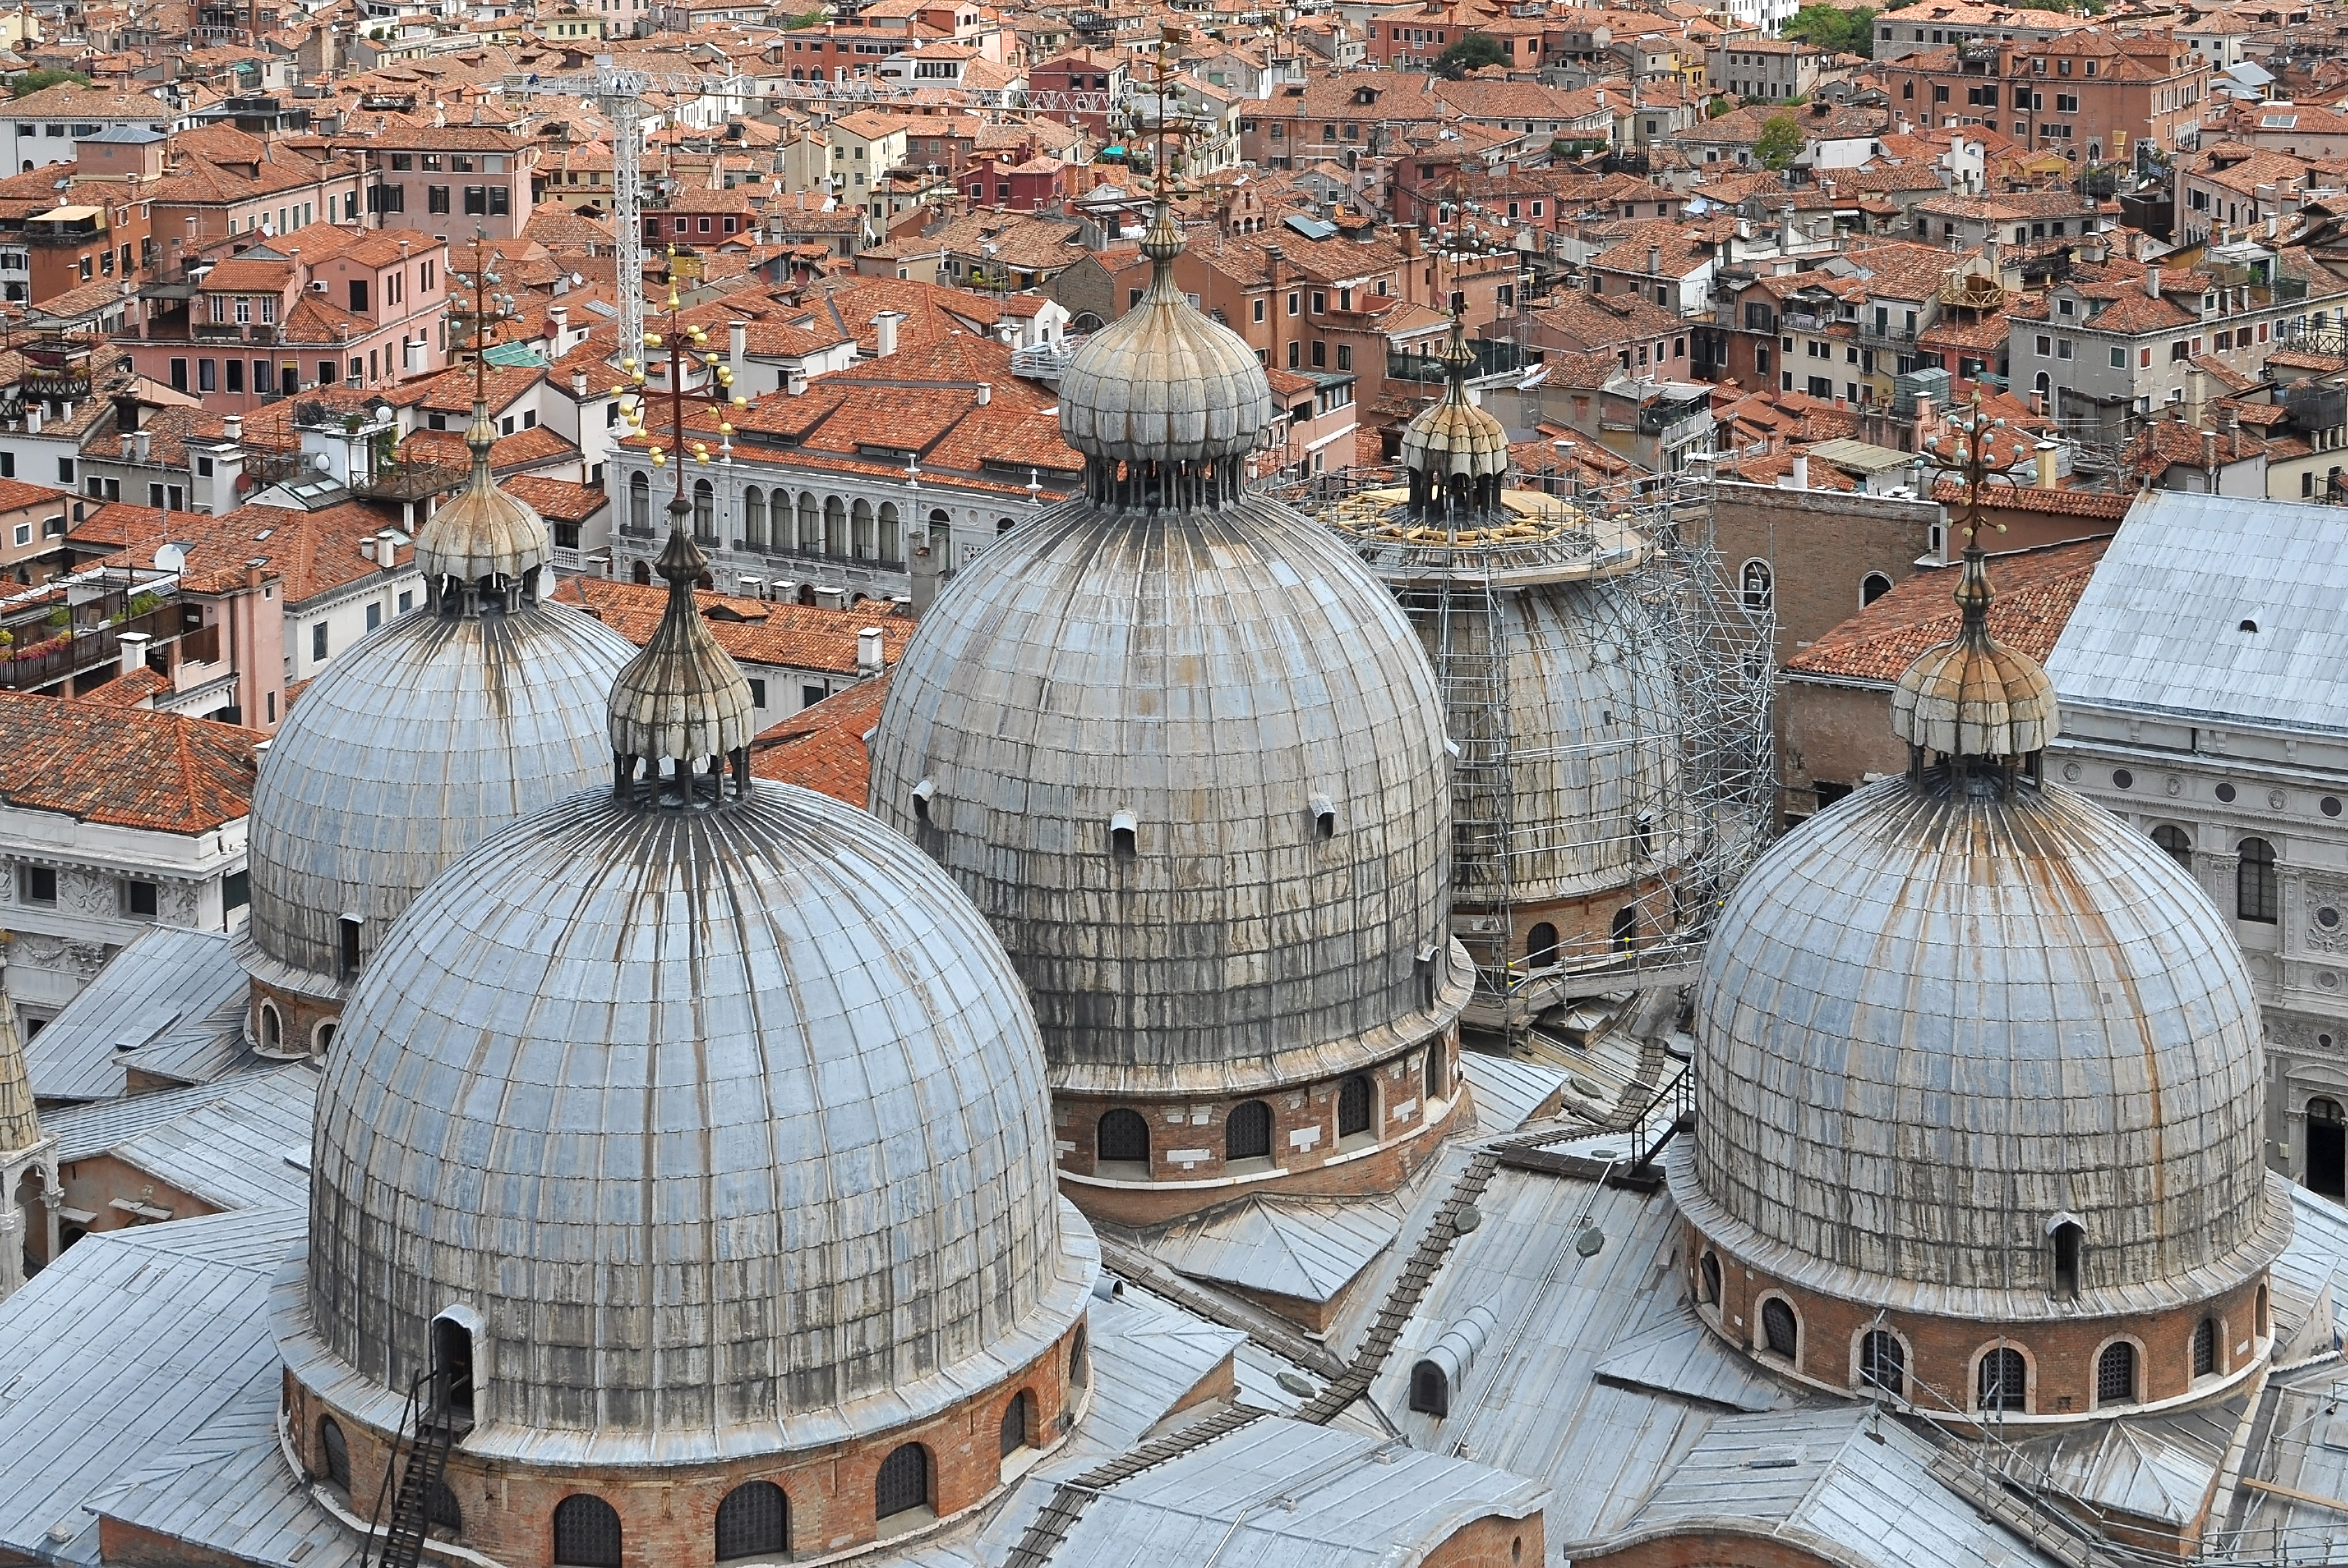 Views from the Campanile of St. Mark's Basilica 001